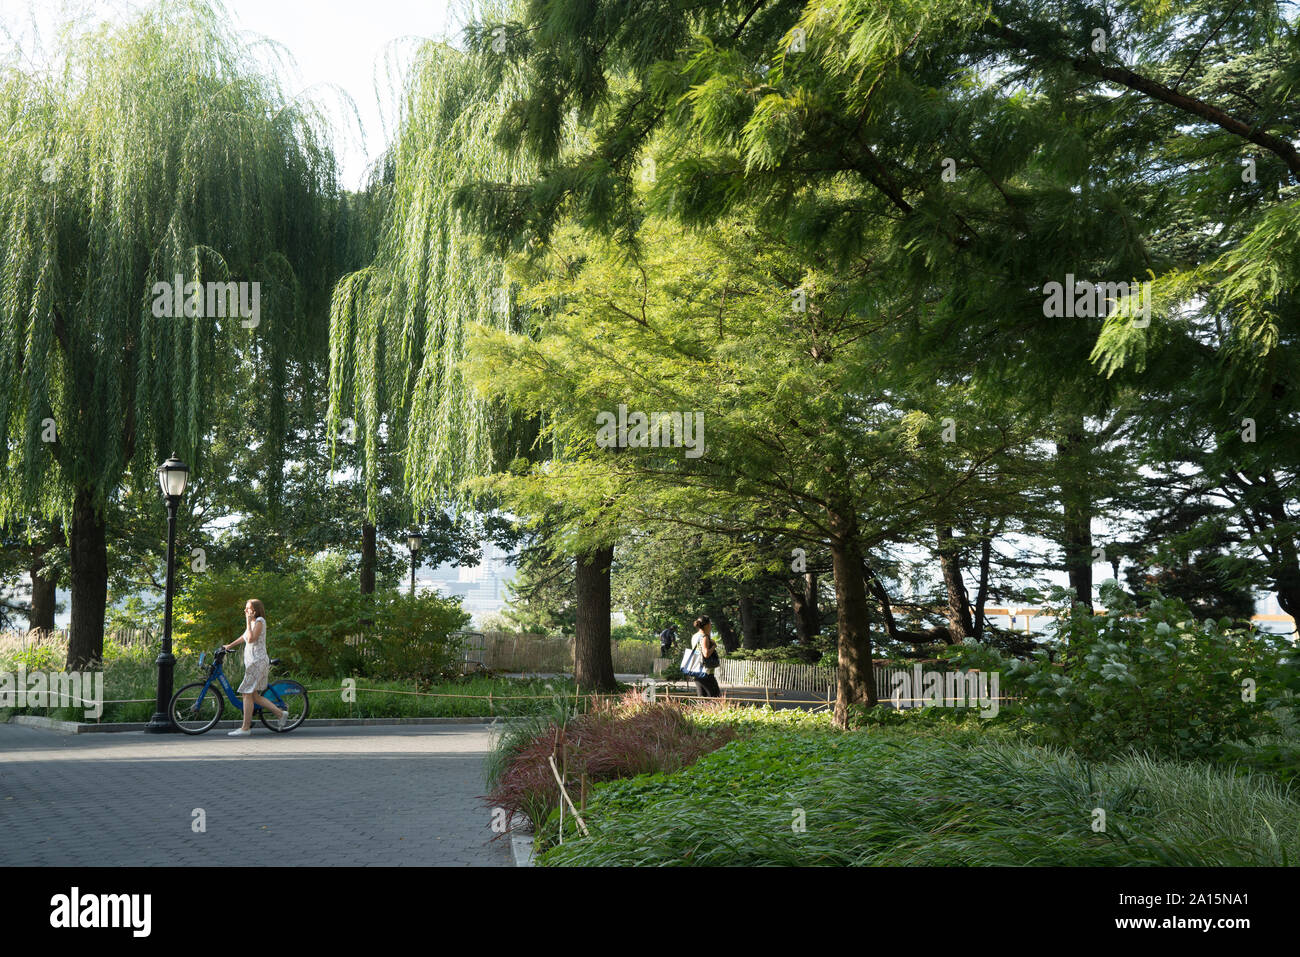 South Cove in Battery Park City, a neighborhood in Manhattan, as it looked on a warm afternoon in early fall. Stock Photo